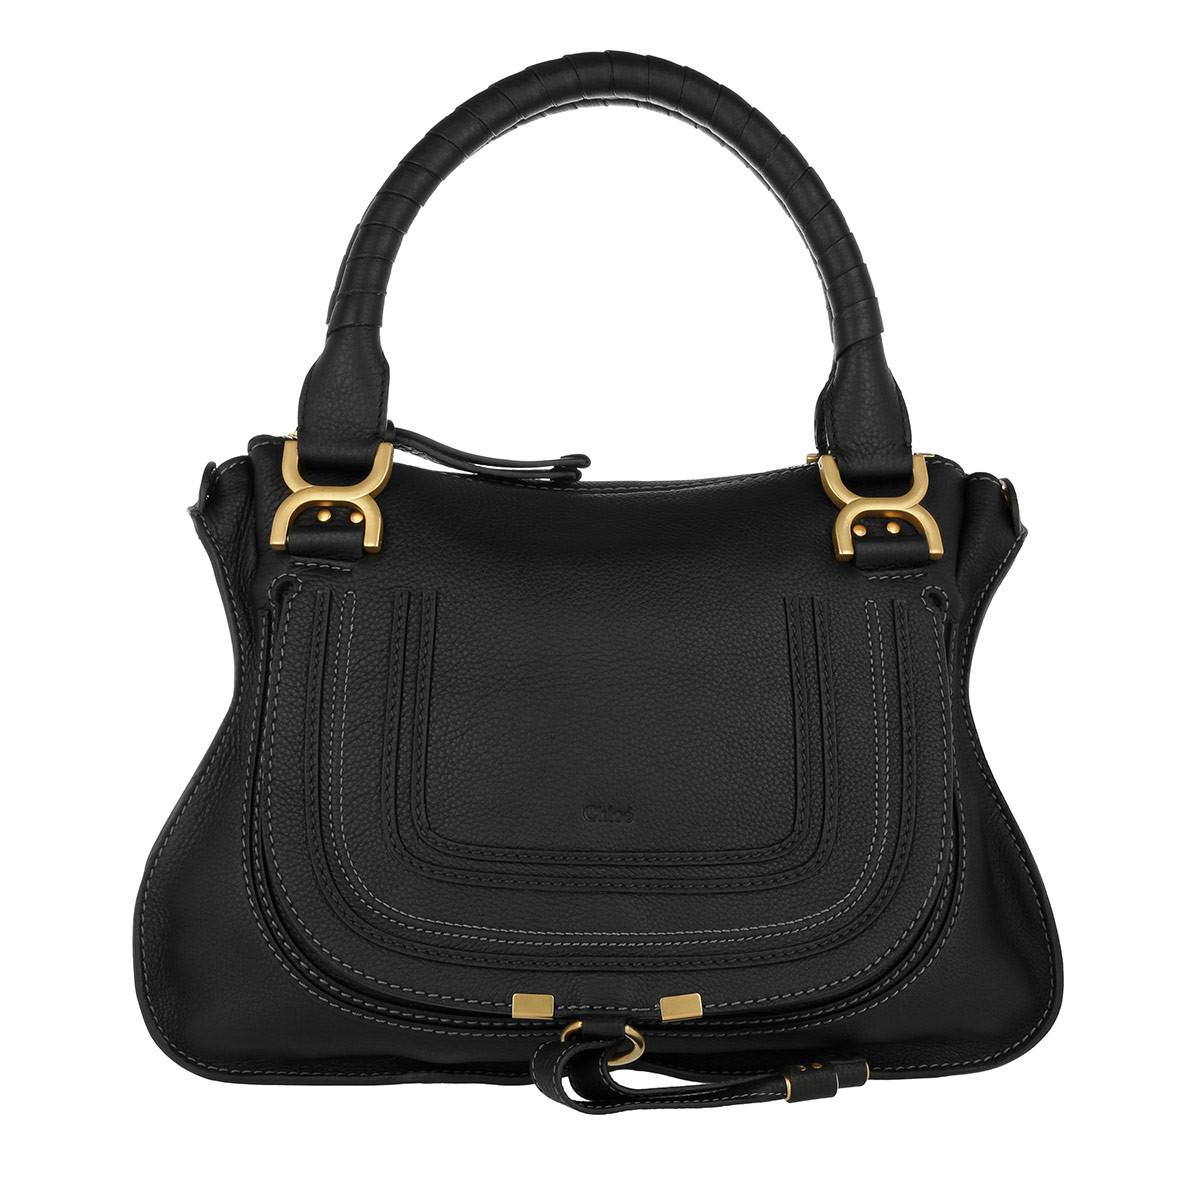 Chloé Marcie Small Leather Satchel in Black - Save 44% - Lyst